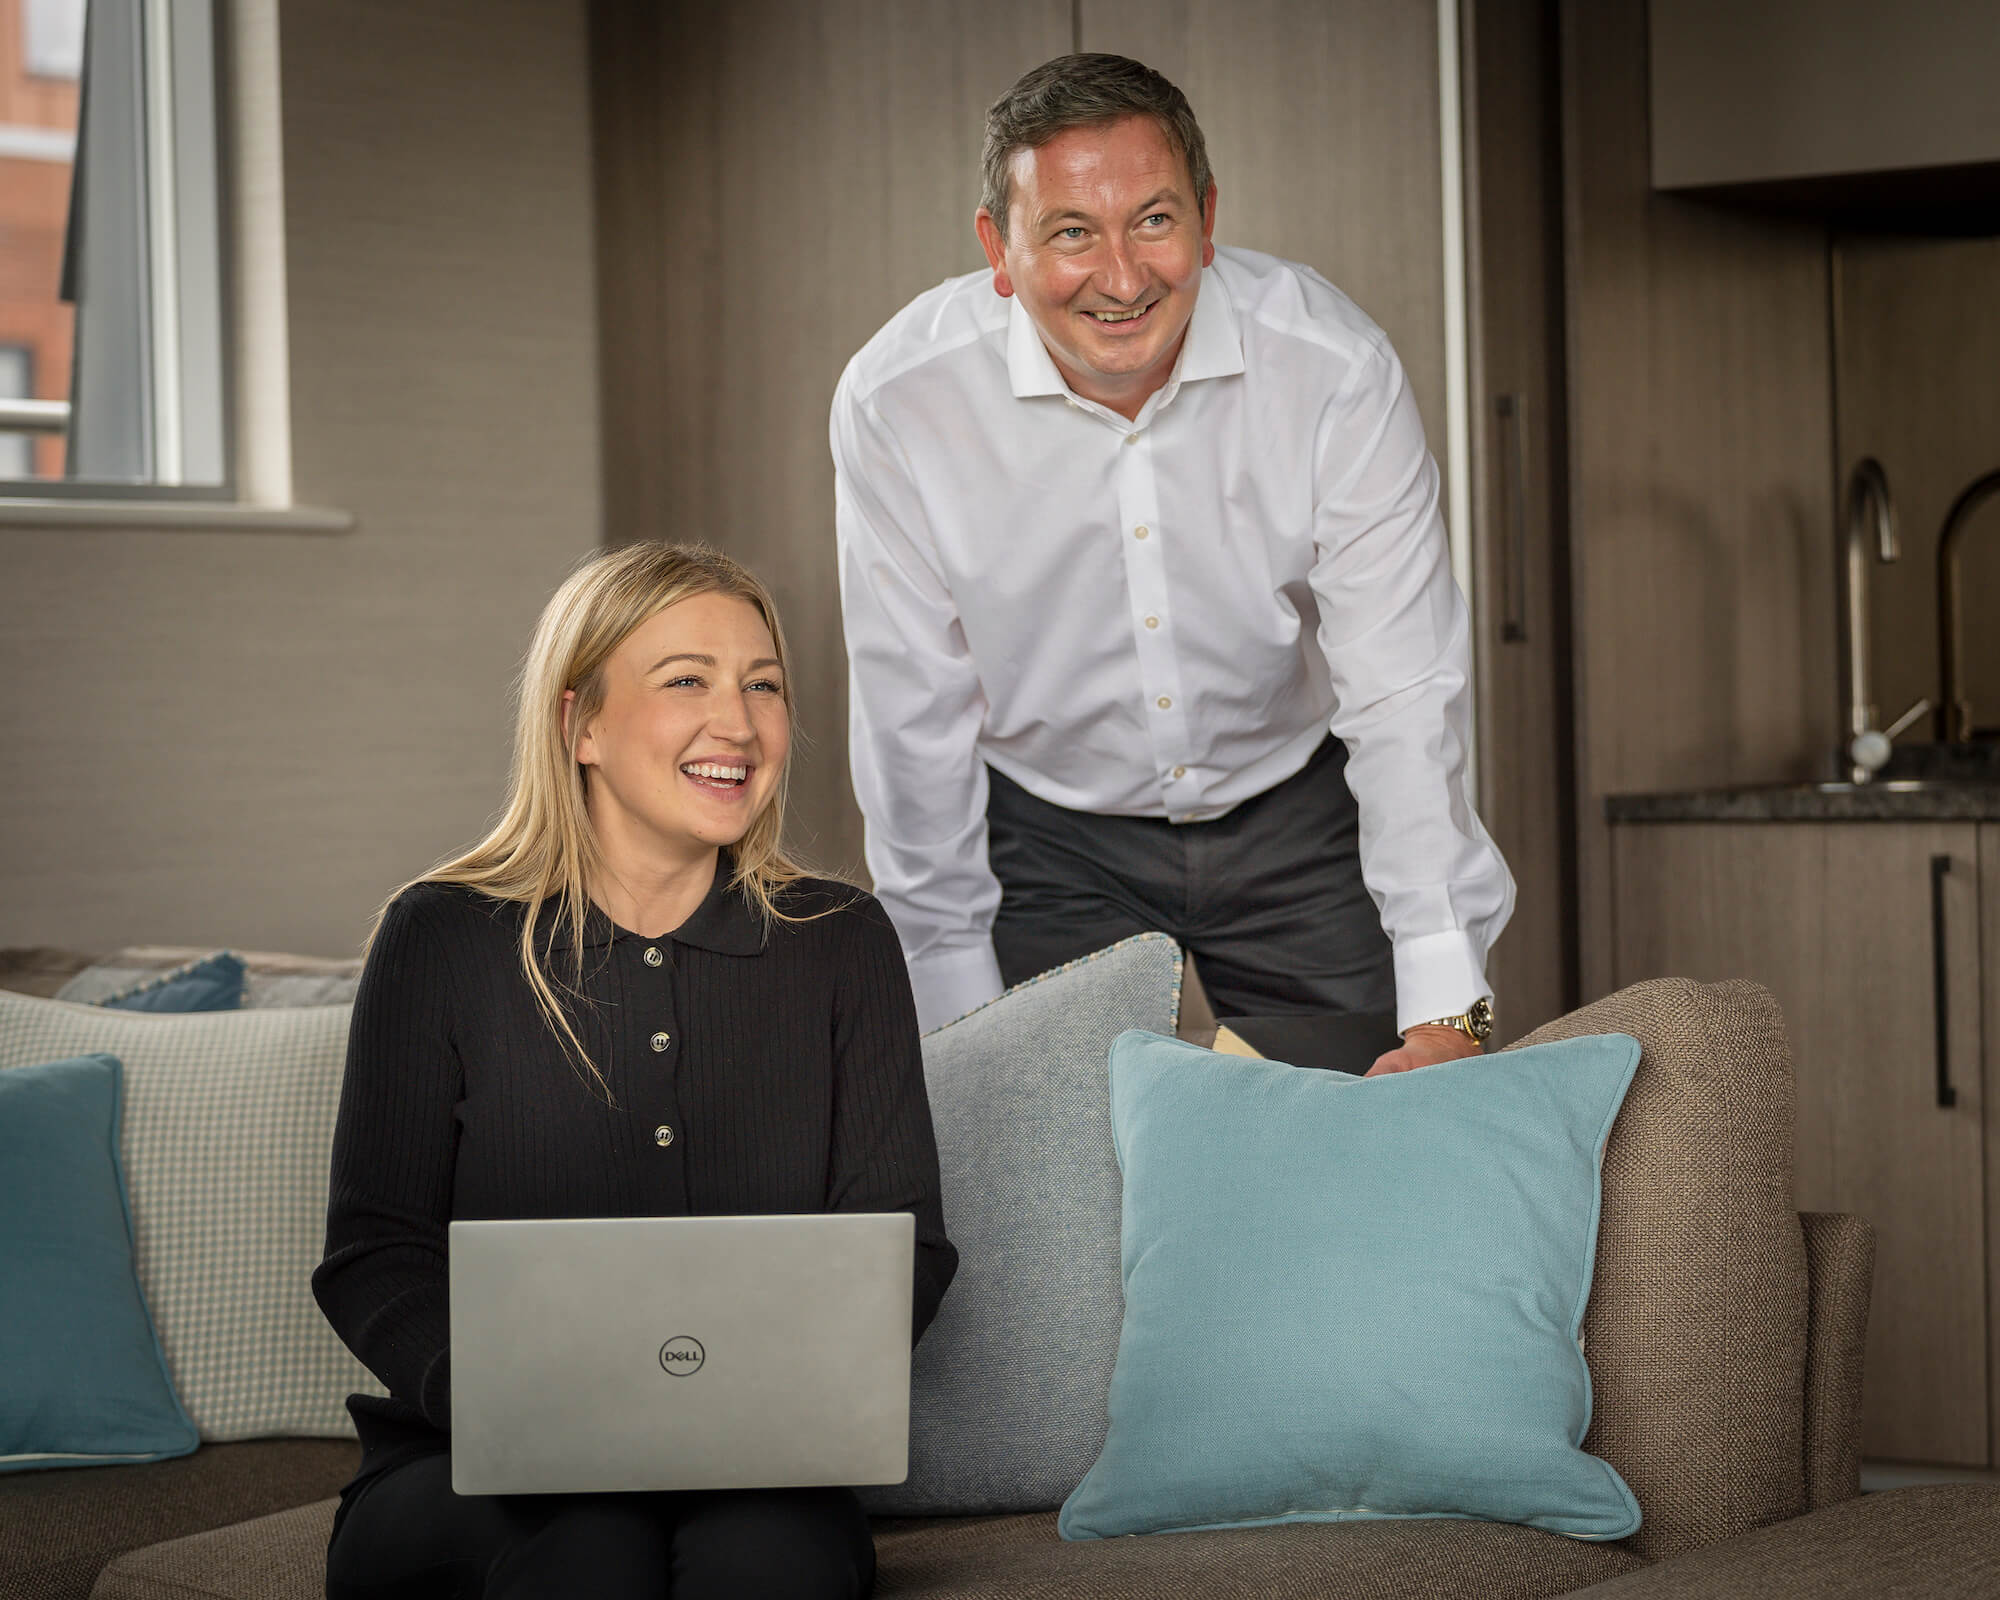 Chester property experts at Currans Estate Agents smile at an out of shot member of staff as they ensure all of their industry endorsements and memberships are up to date and in compliance.